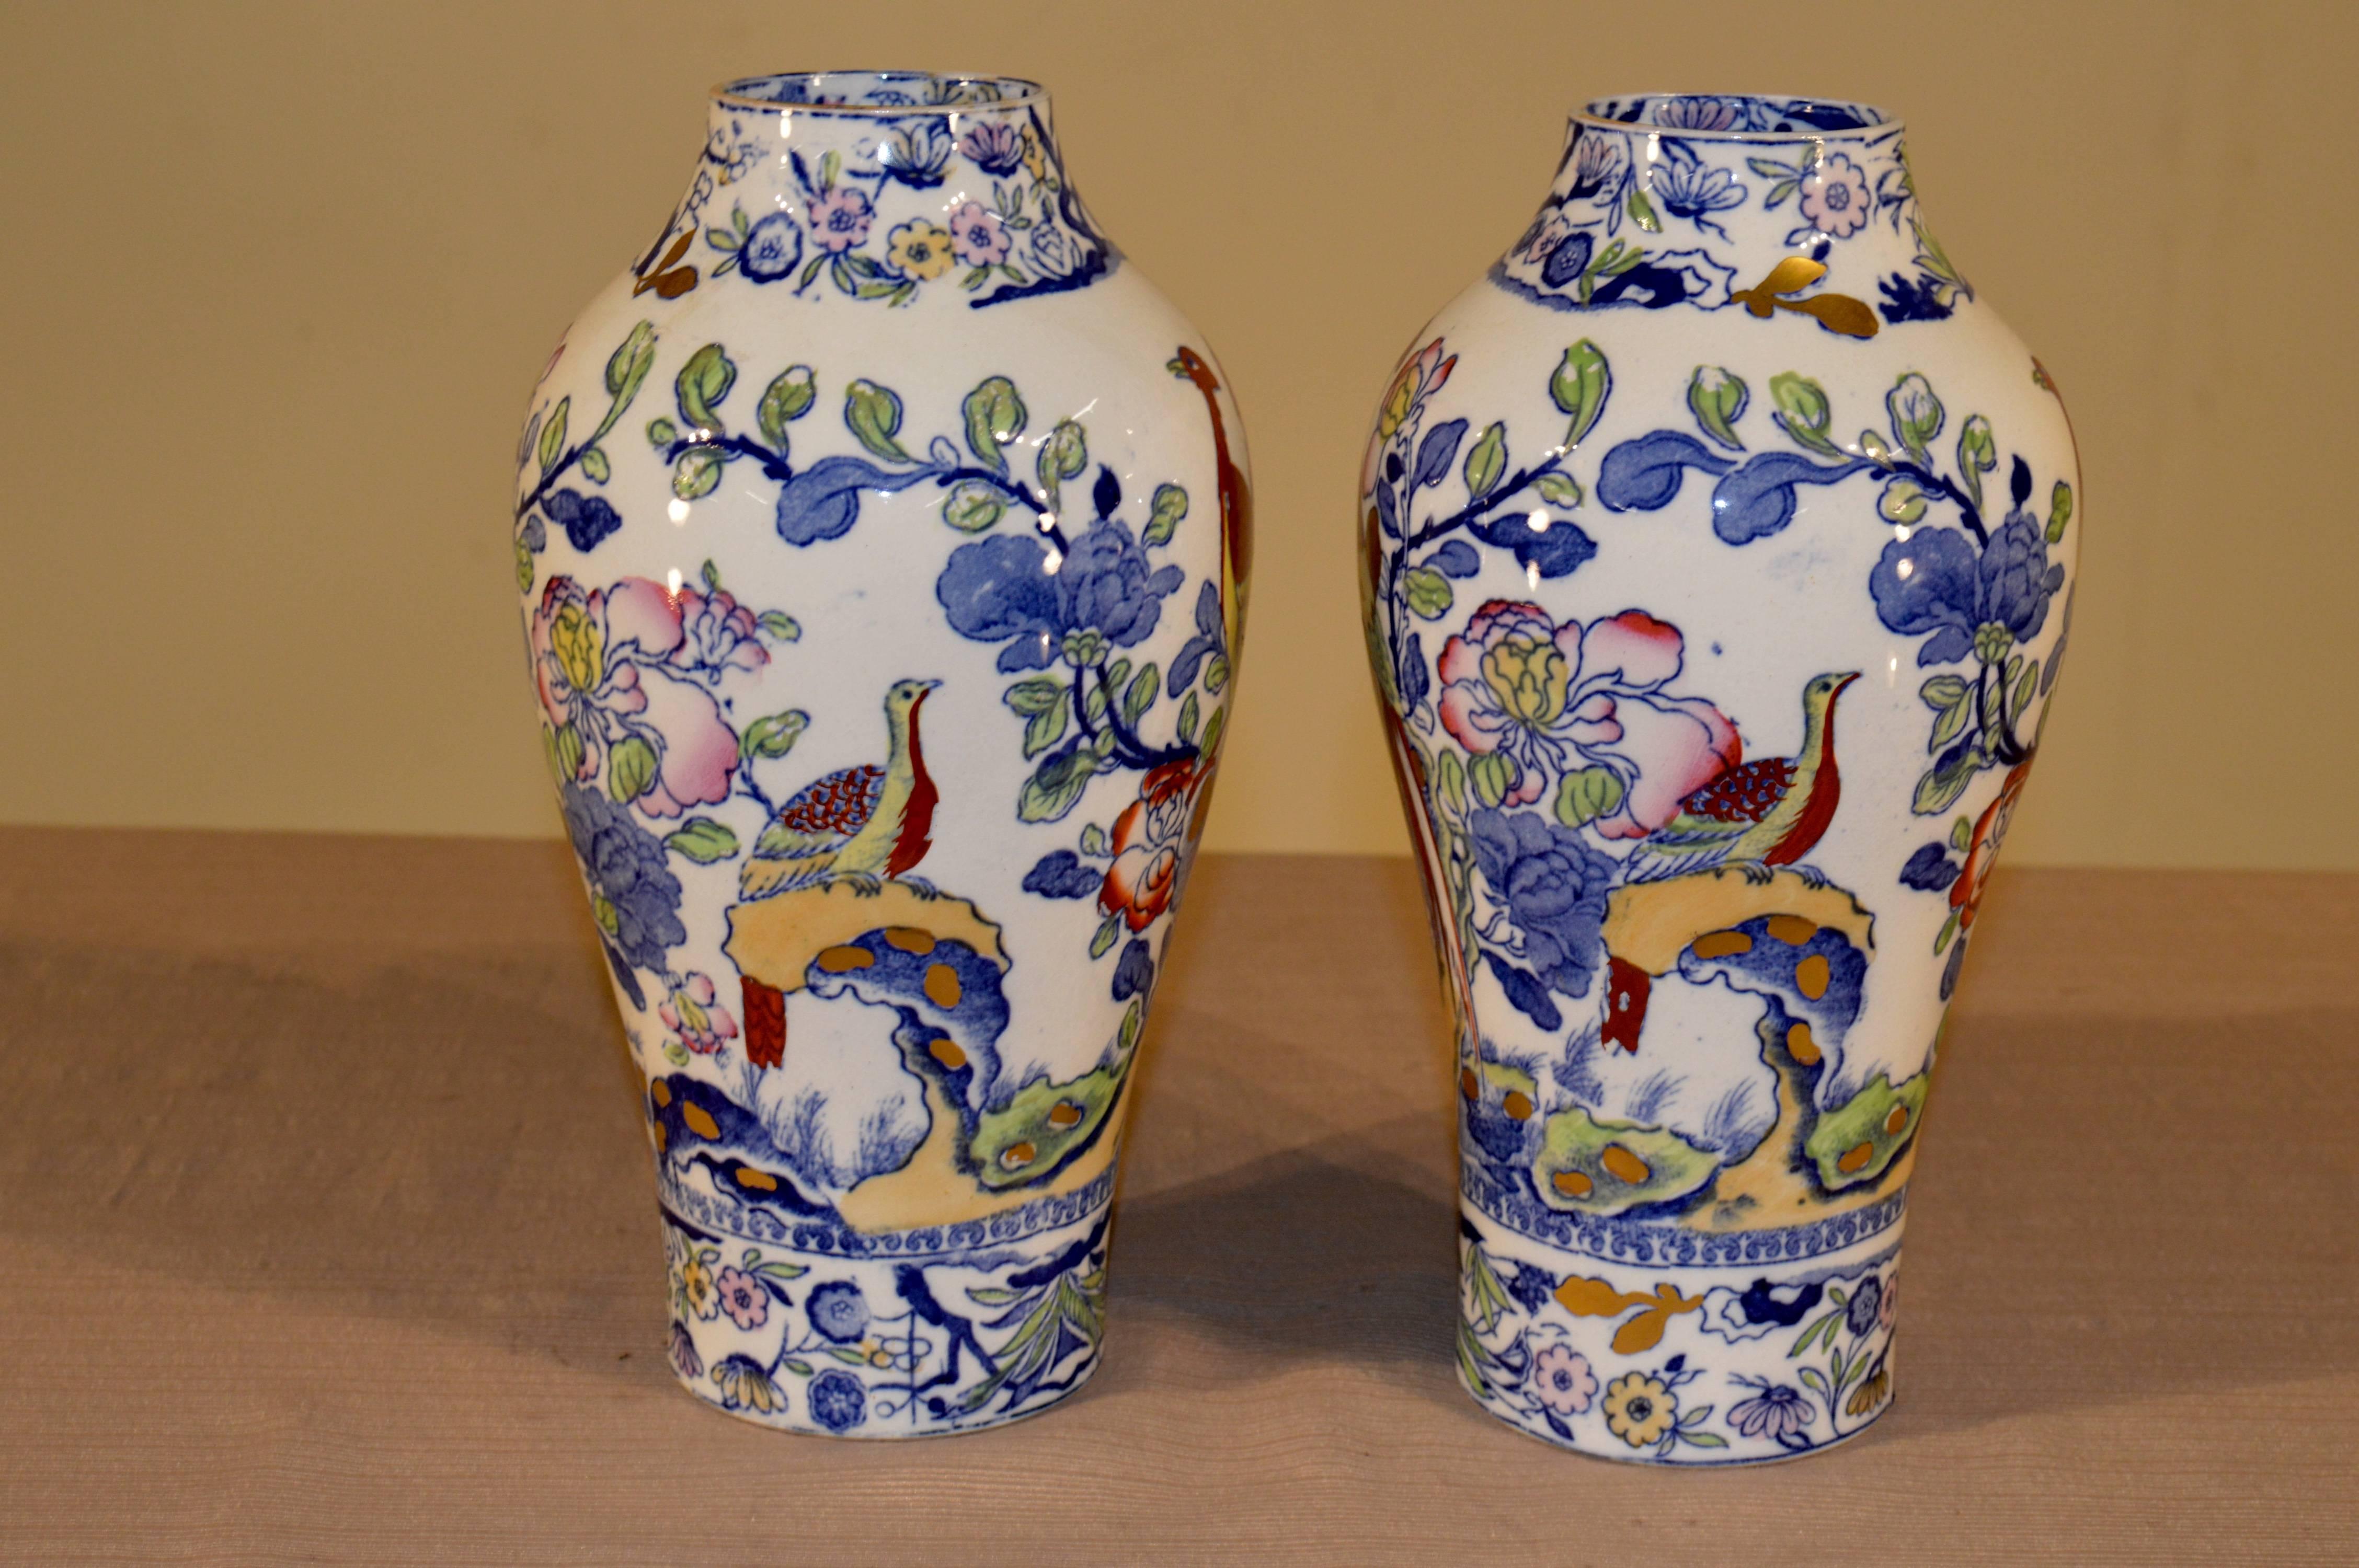 19th century pair of vases signed by Mason's. The vases are transfer pattern with birds and flowers and have hand-painted decoration as well. There are slight losses to the painted decoration. Beautiful coloring and form.